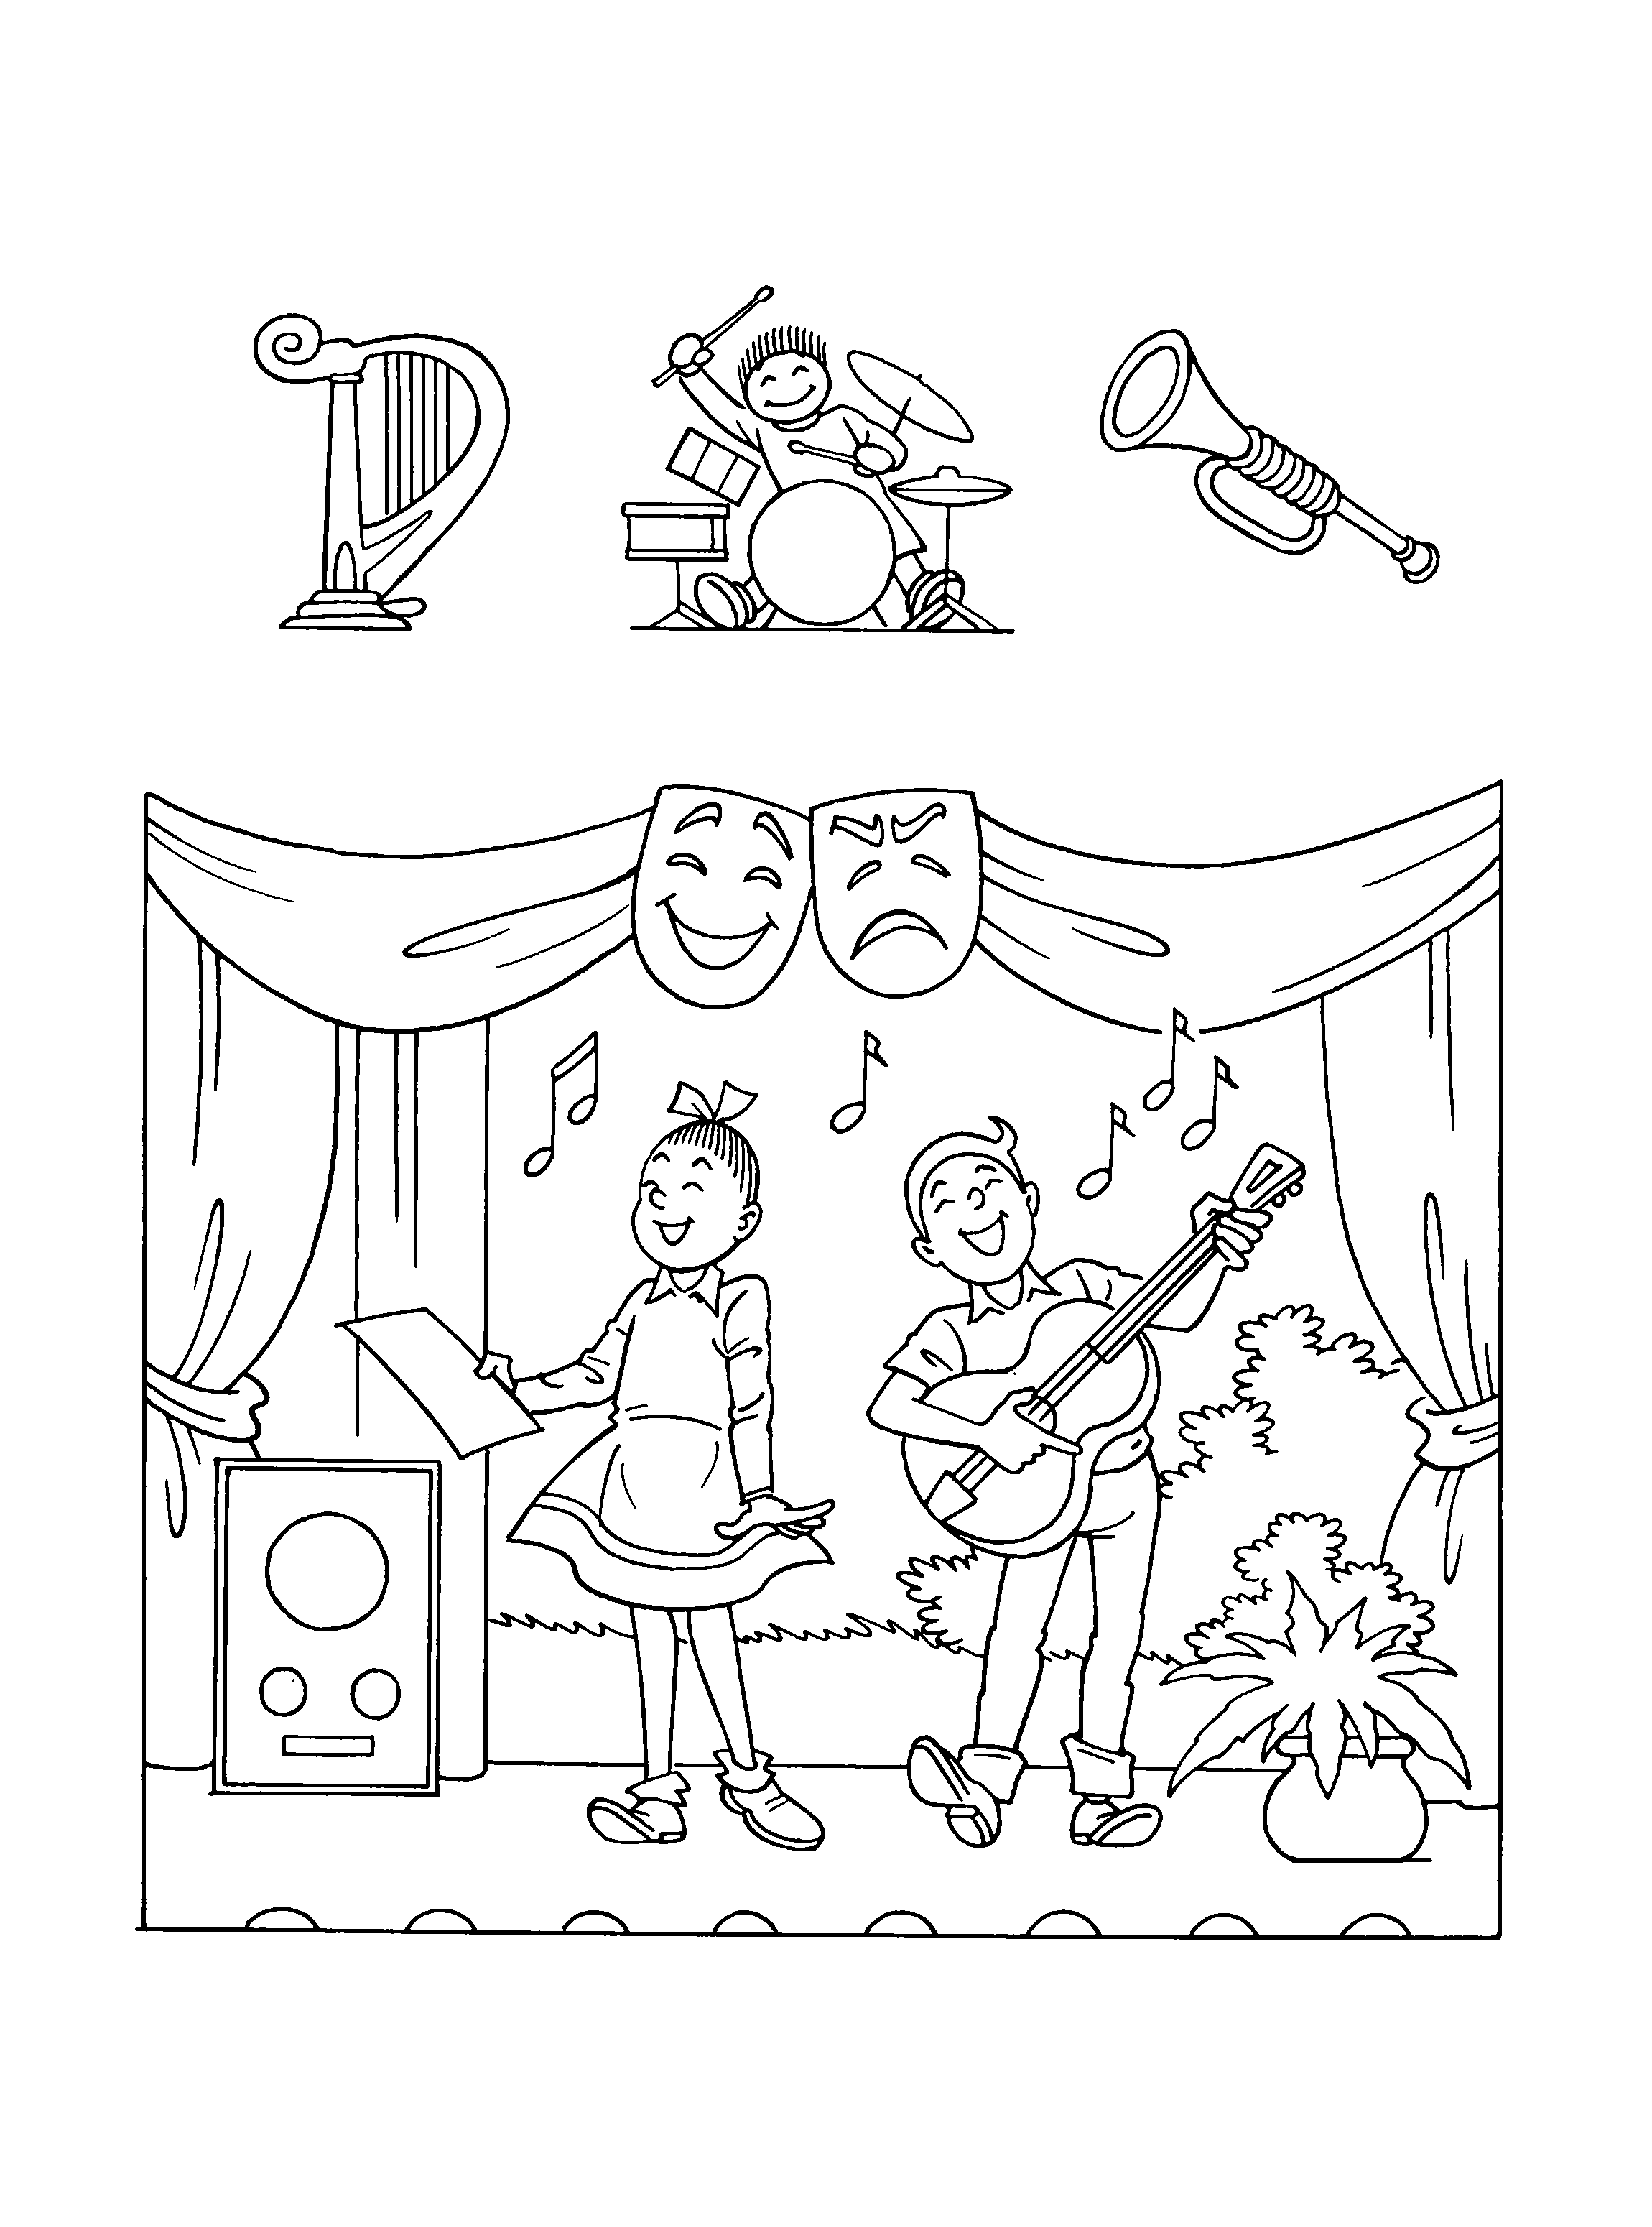 Coloring Page - Spike and suzy coloring pages 37